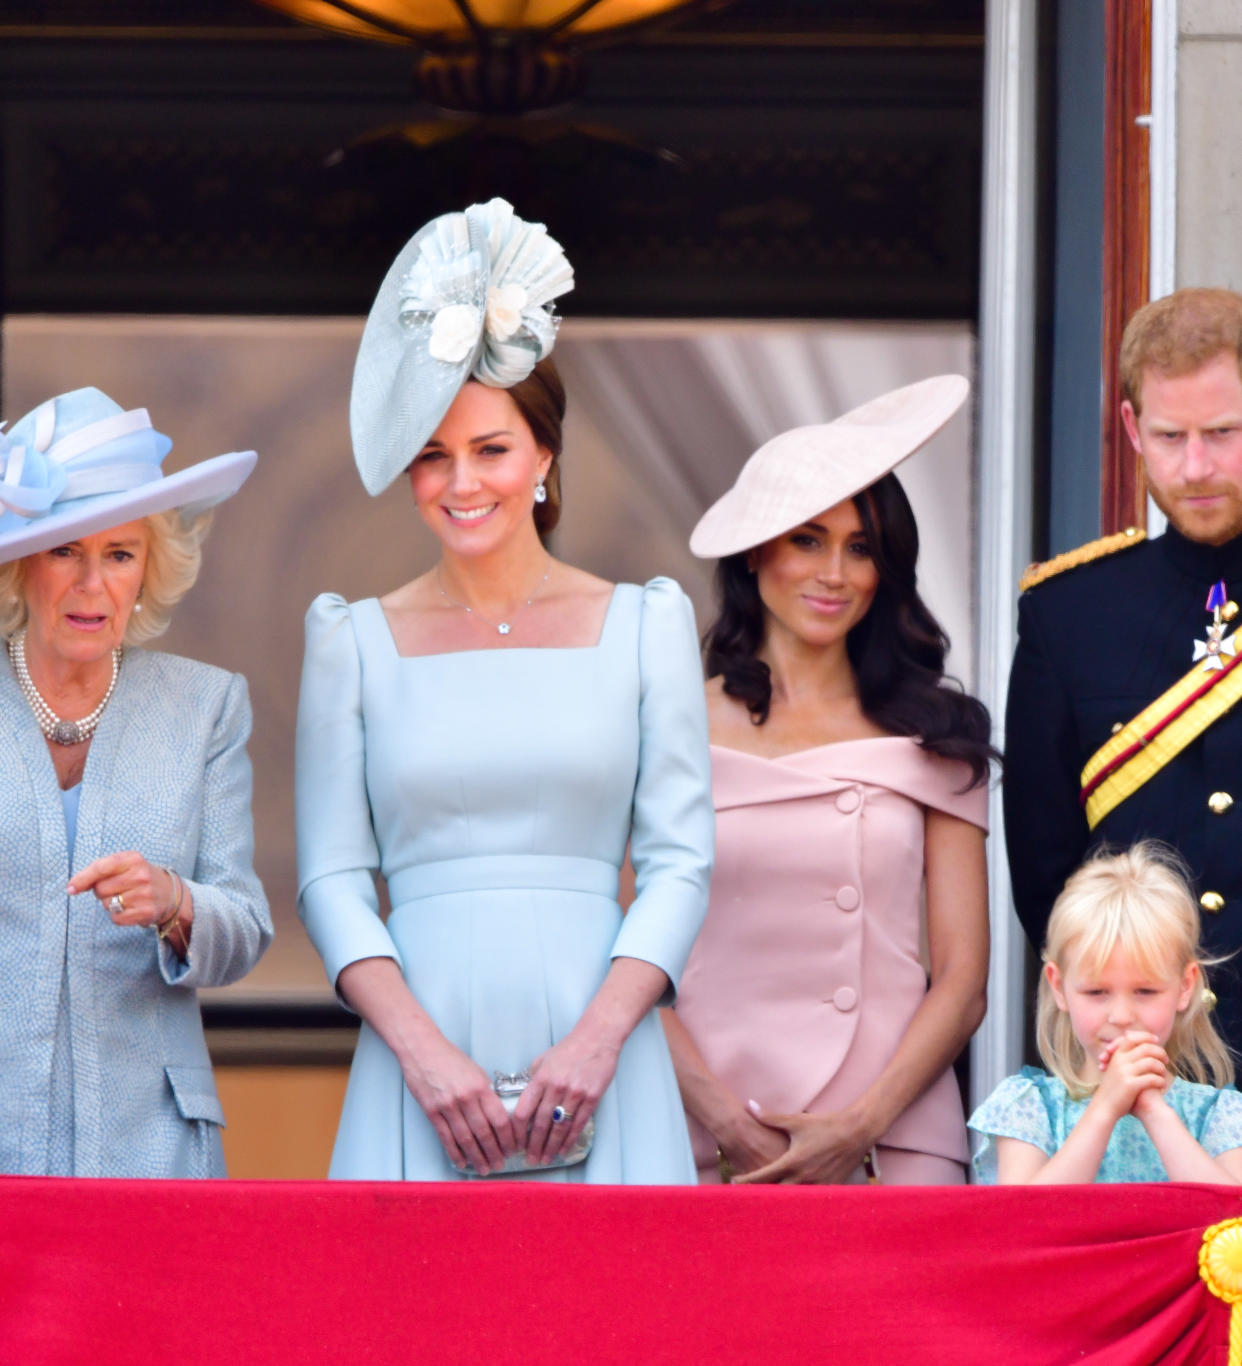 Kate Middleton and Meghan Markle at the Trooping the Colour ceremony at Buckingham Palace on June 9. (Photo: James Devaney/FilmMagic)